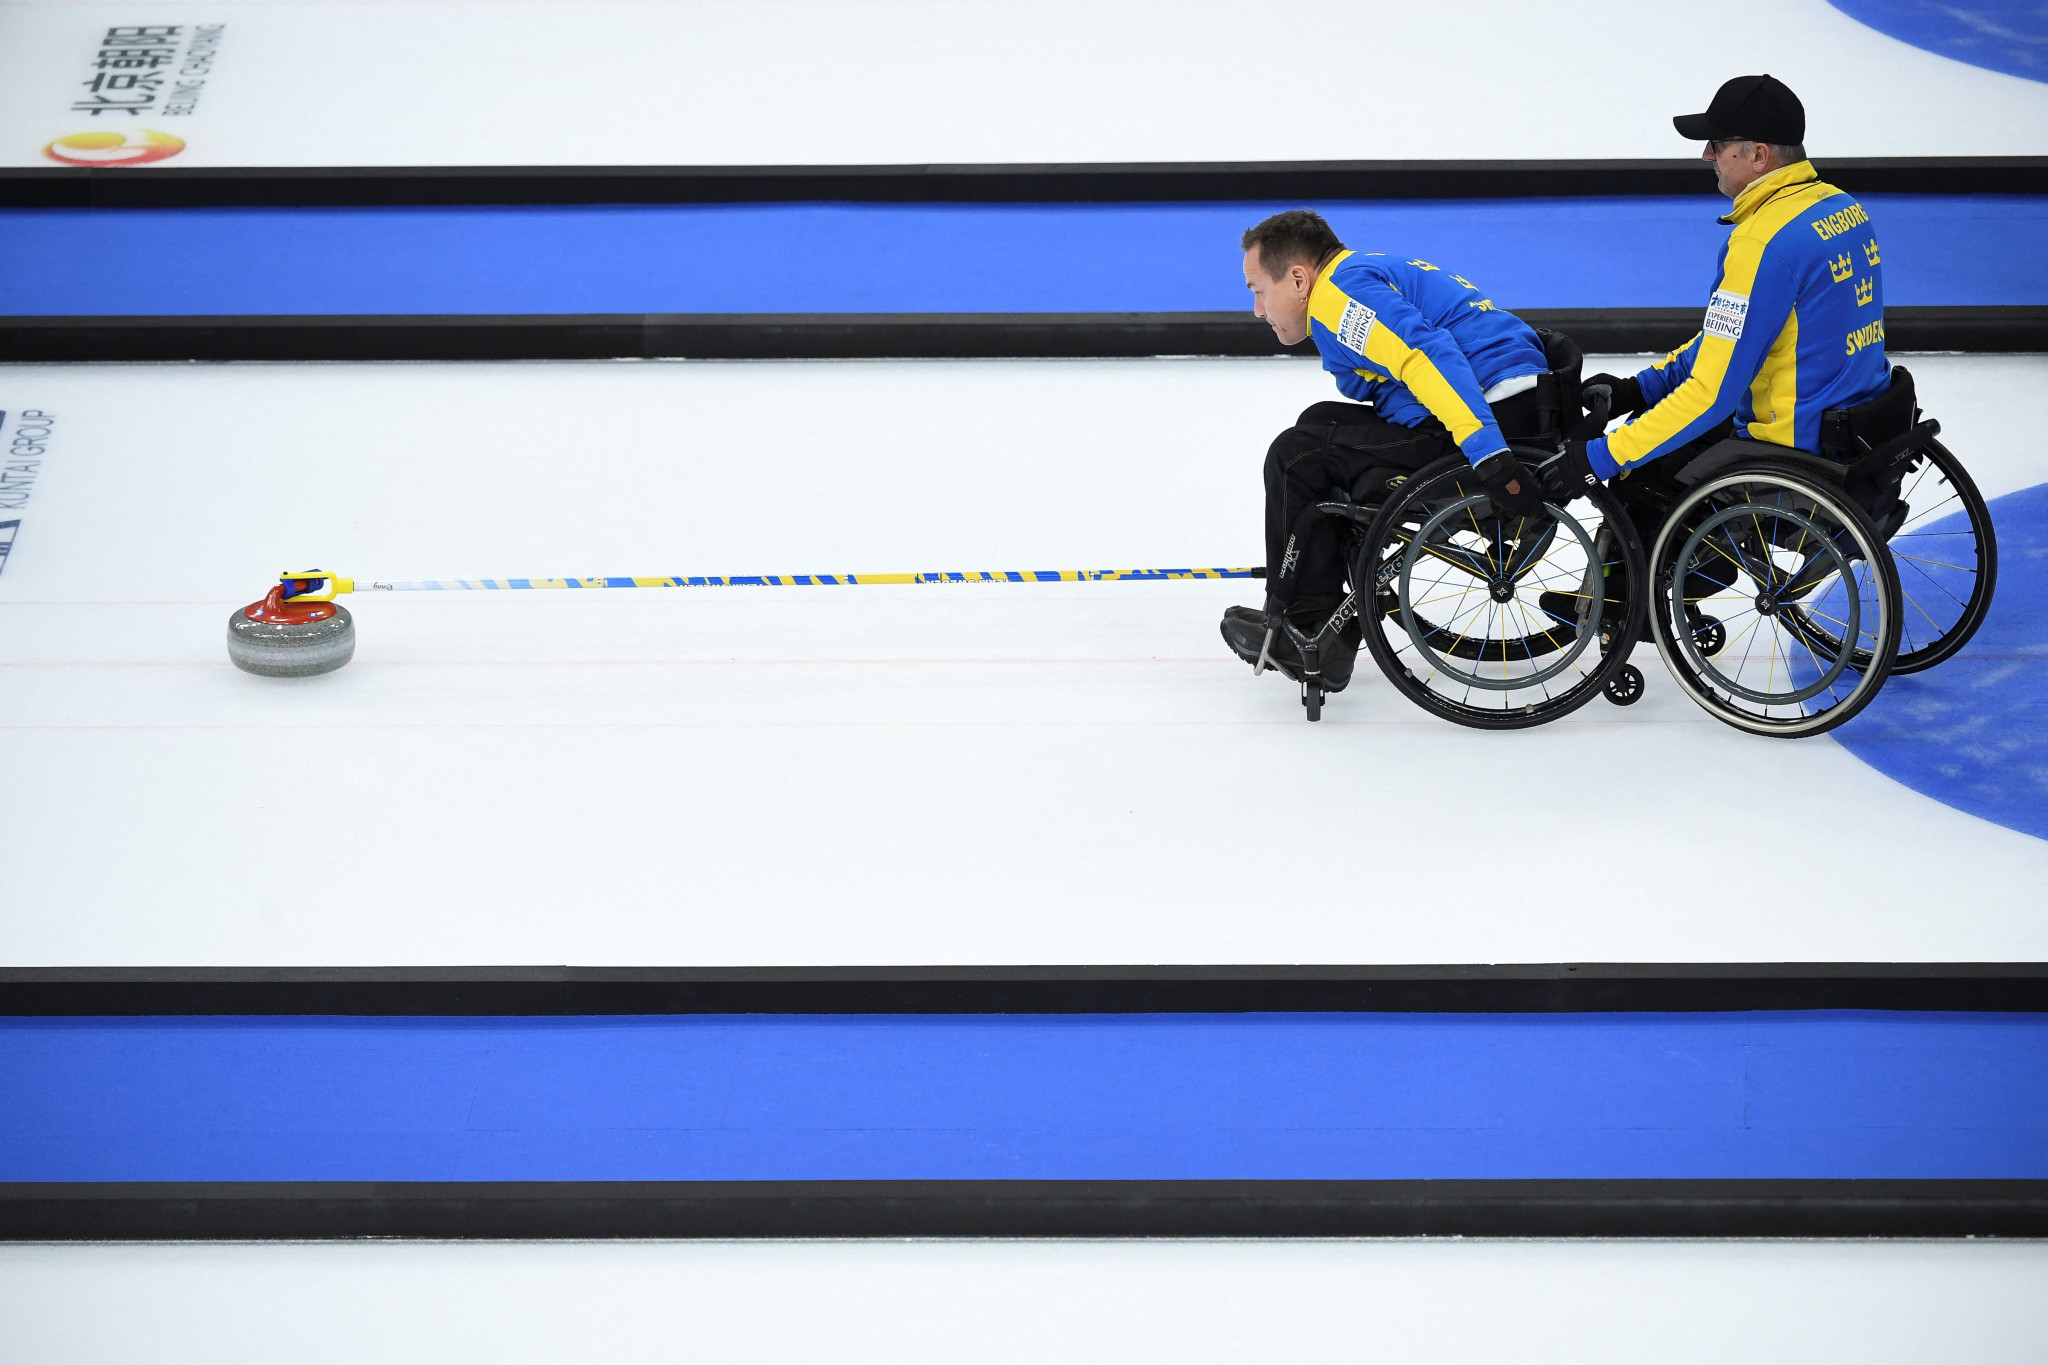 Sweden are one win away from securing a first World Wheelchair Curling Championship gold medal ©Getty Images